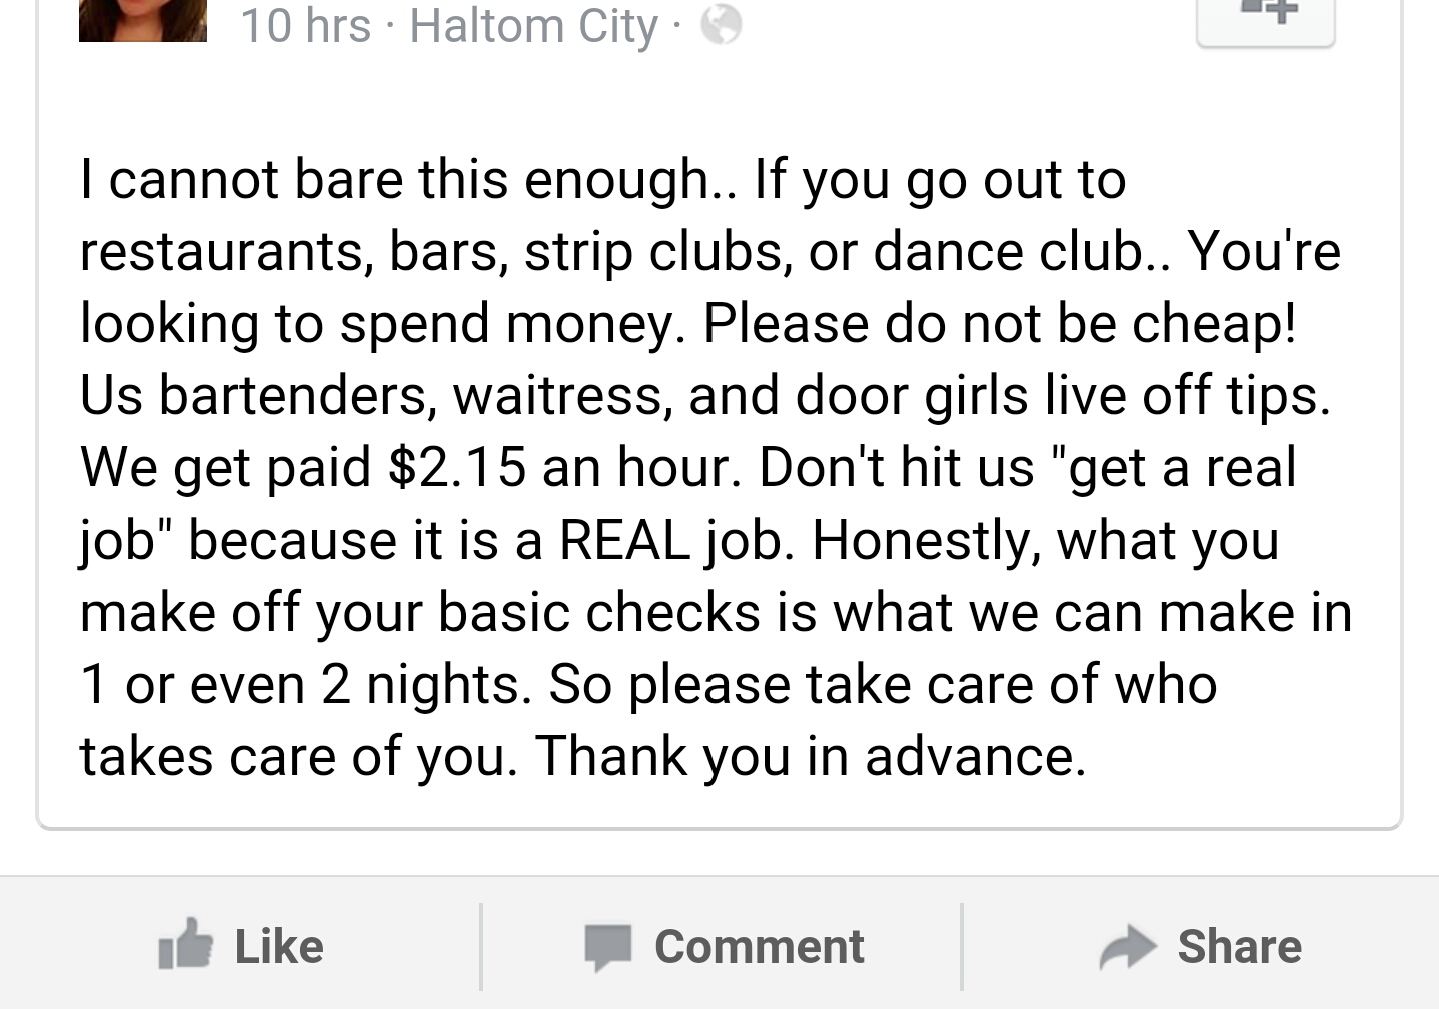 document - 10 hrs Haltom City I cannot bare this enough.. If you go out to restaurants, bars, strip clubs, or dance club.. You're looking to spend money. Please do not be cheap! Us bartenders, waitress, and door girls live off tips. We get paid $2.15 an h